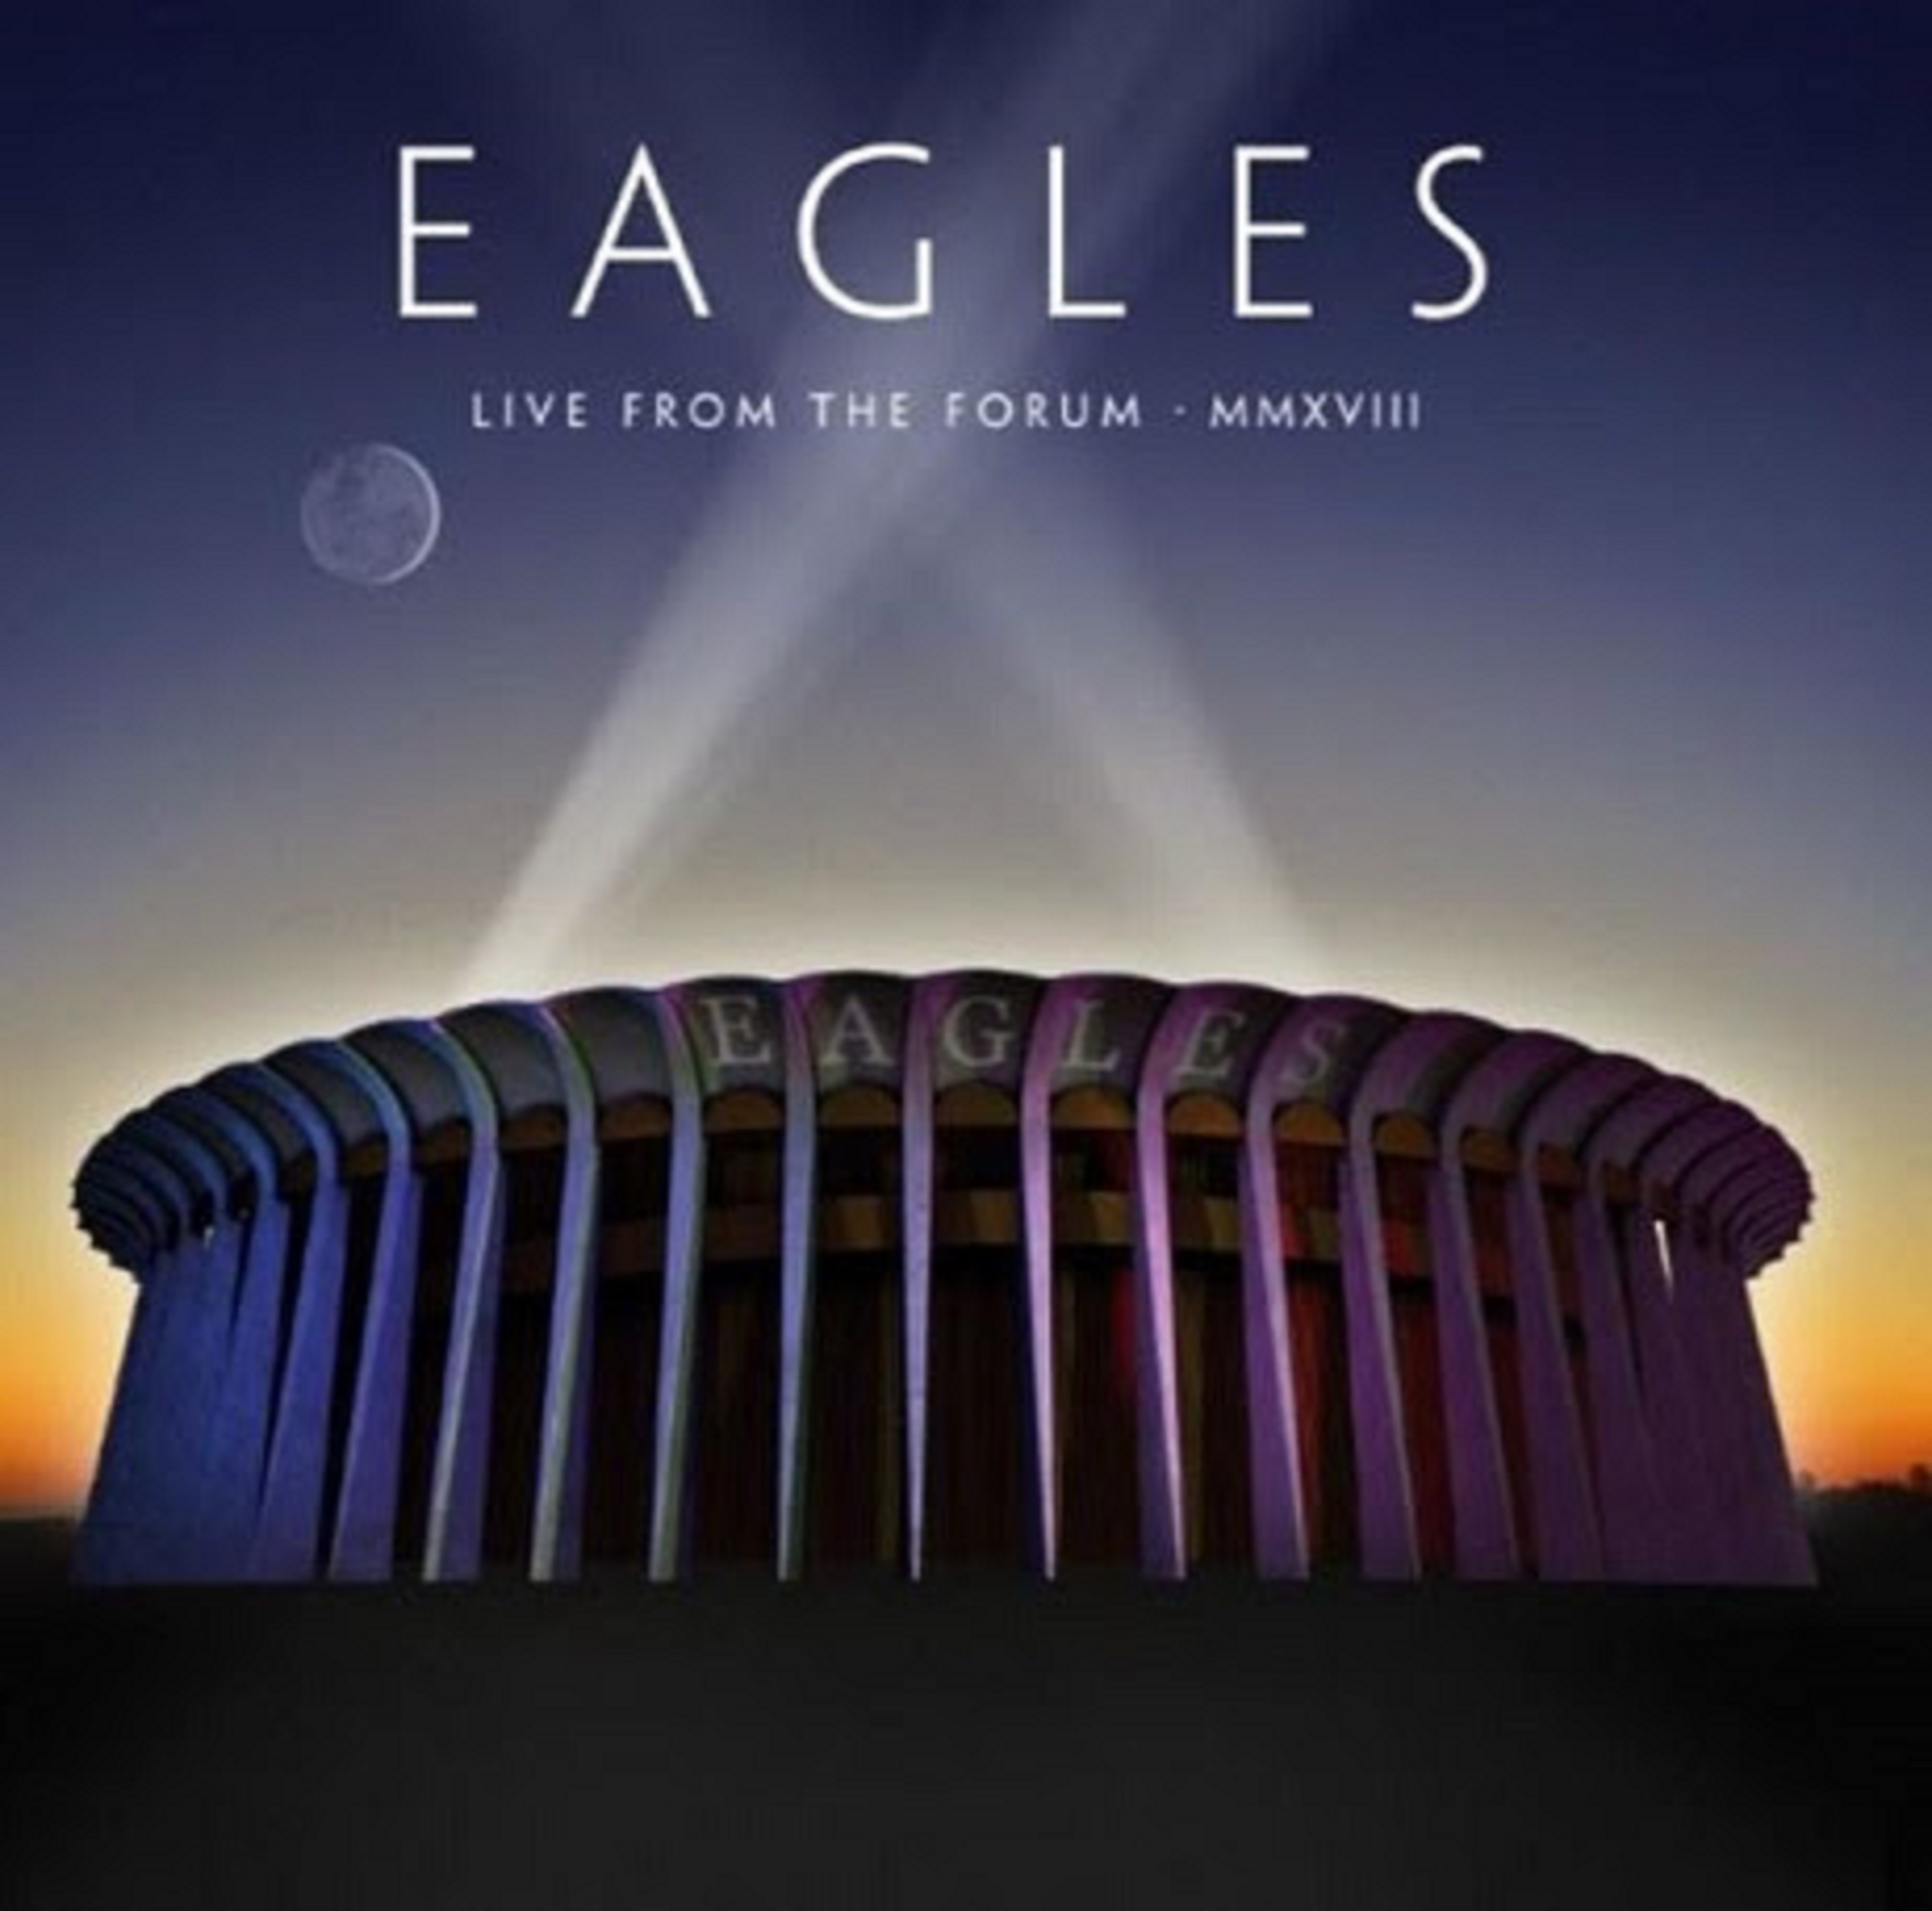 ESPN to Air Eagles “Live From The Forum MMXVIII” on Sunday Night